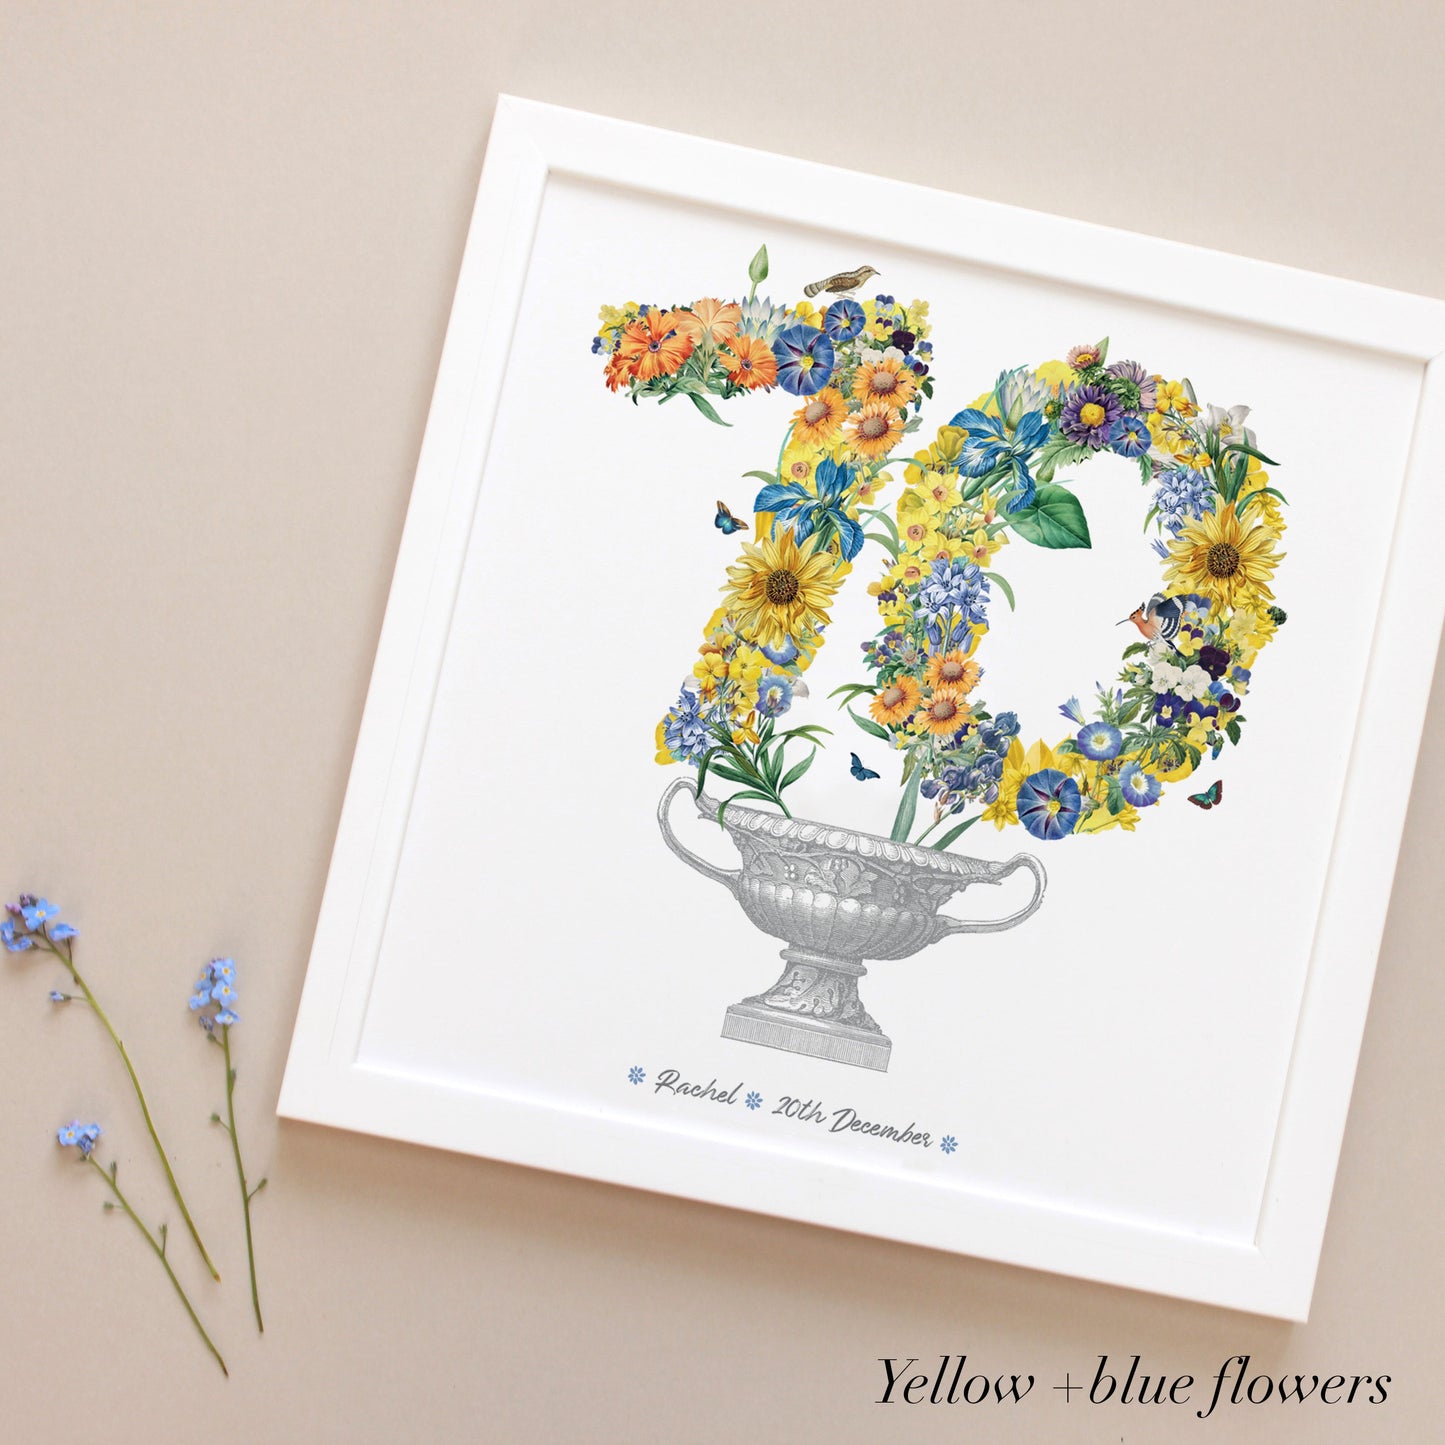 70th birthday gift with yellow and blue flowers in a white frame